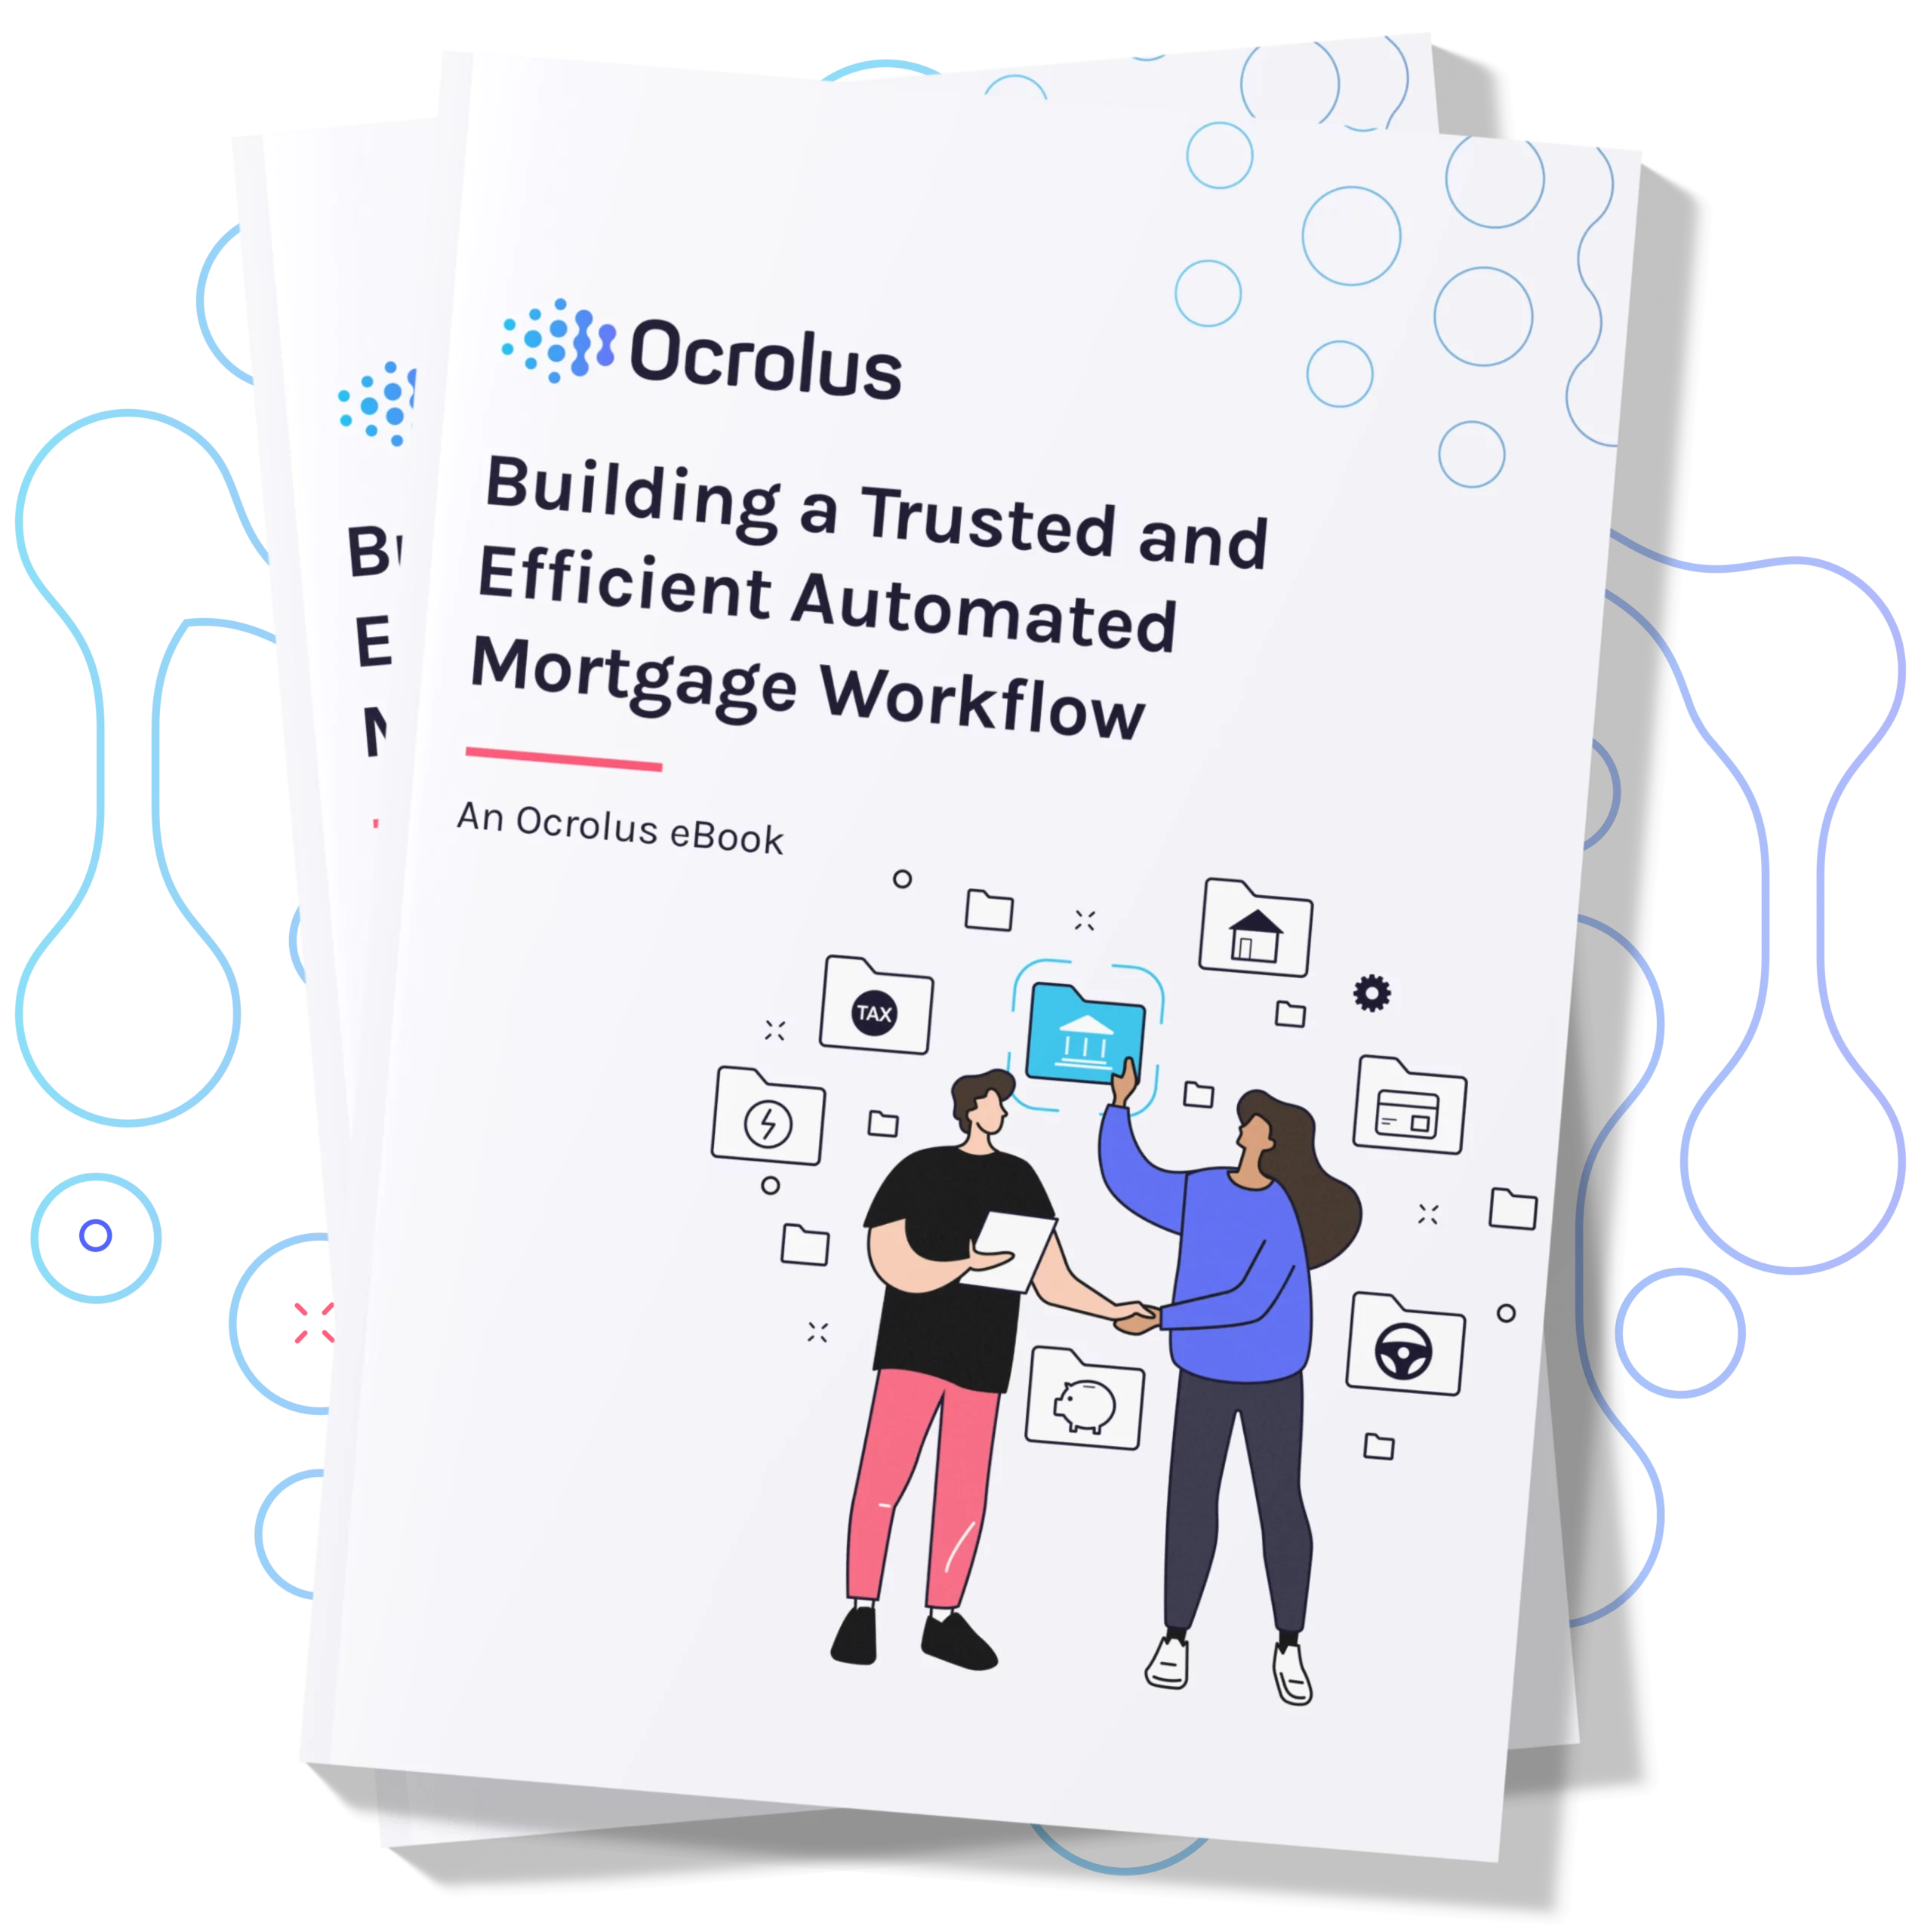 Building a Trusted and Efficient Automated Mortgage Workflow